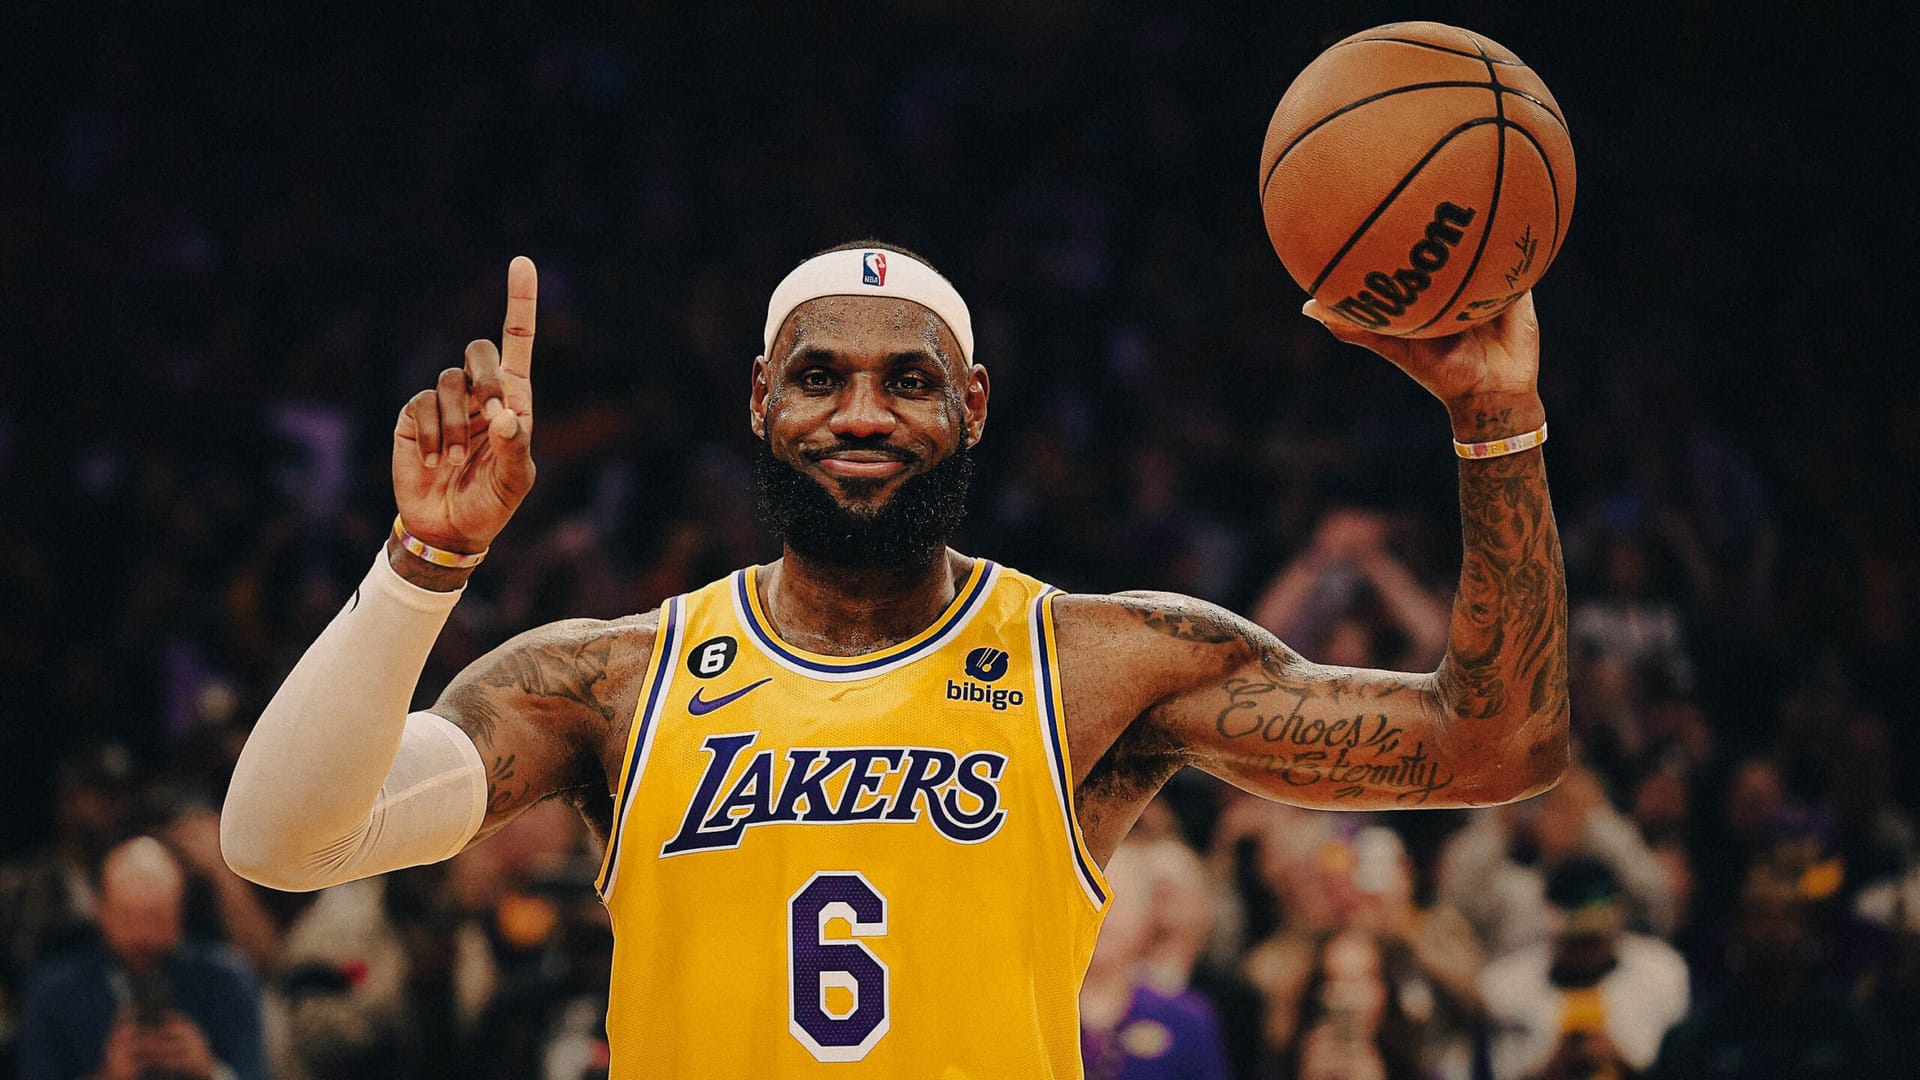 Top 20 NBA Career Scoring Leaders Of All Time In The World - LeBron James